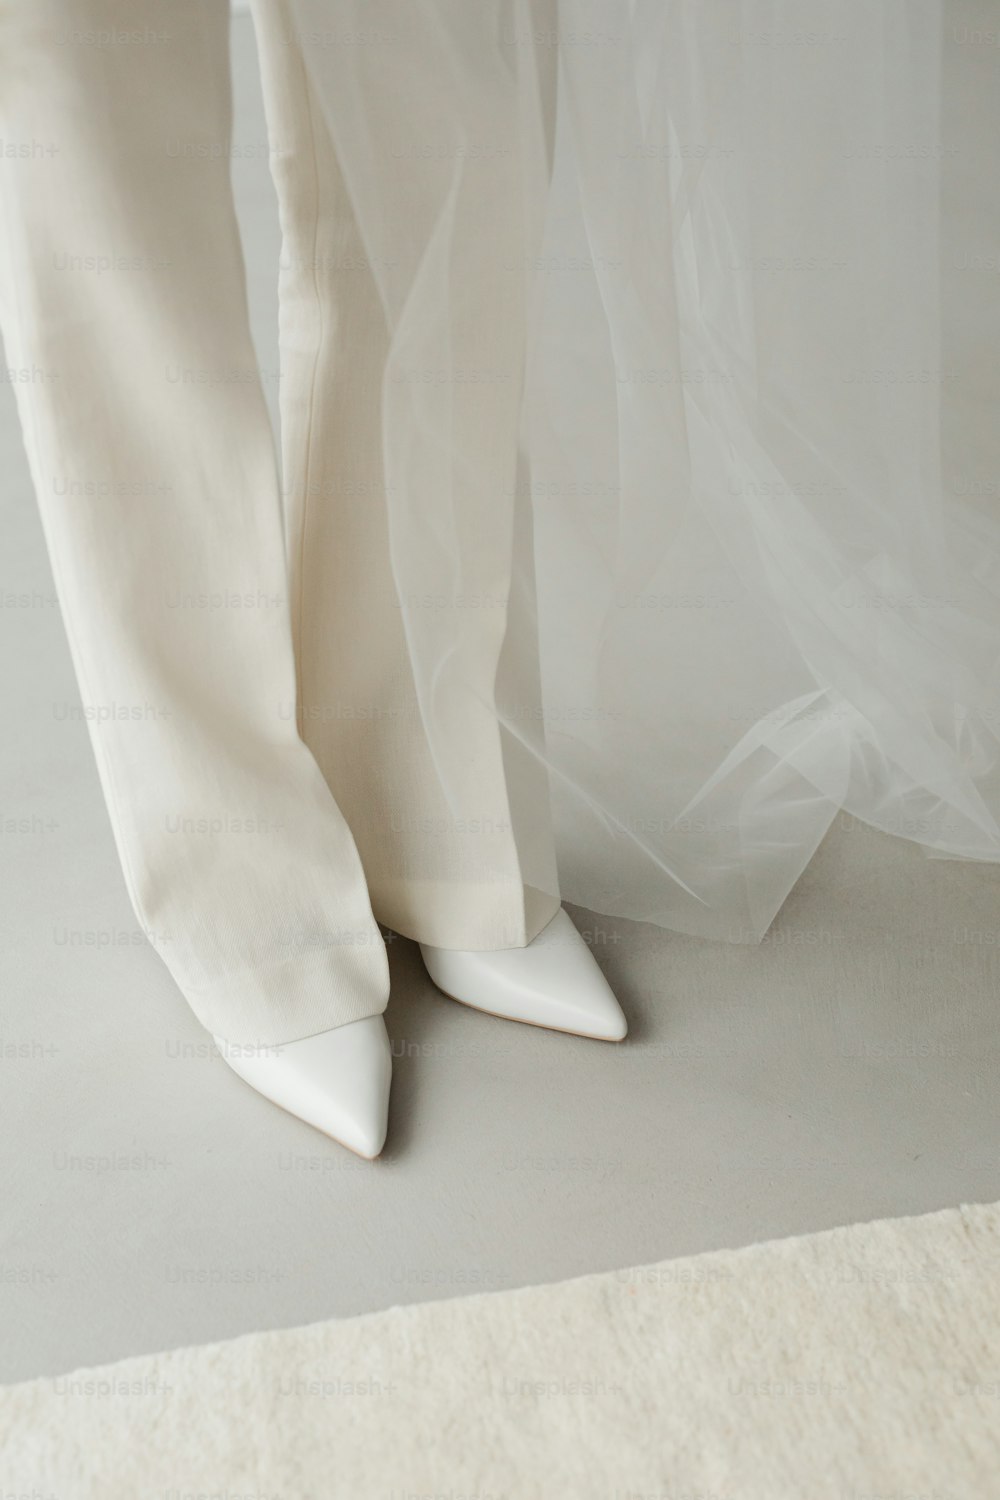 a pair of white shoes and a white sheet